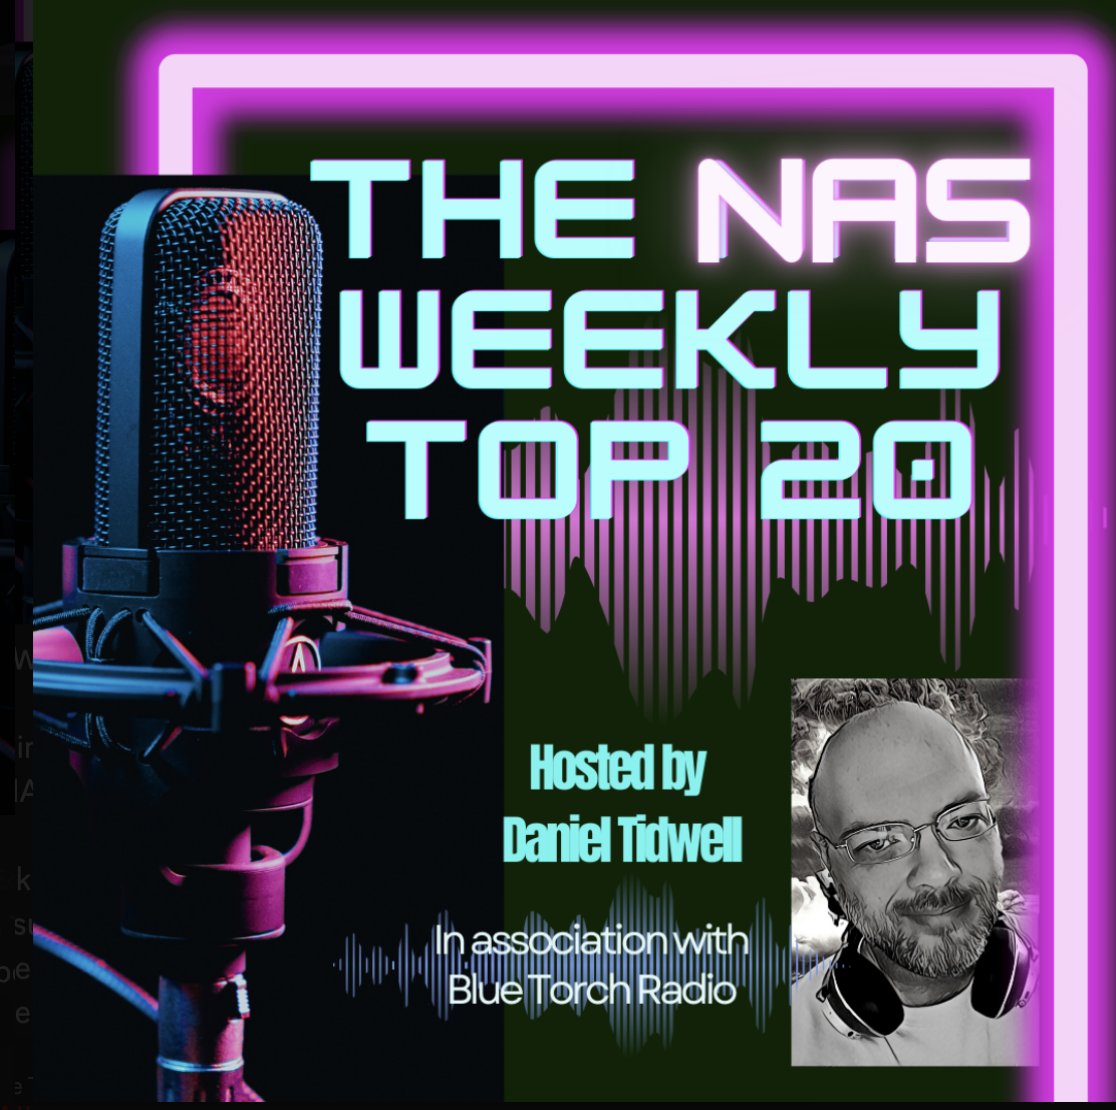 The NAS Top 20 Hosted by @DanielTidwell14 in association with Blue Torch Radio Check it out 4 PM UK / Noon ET / 9 AM PT bluetorchradio.com #iwantmynas #stoppayola #indieradio